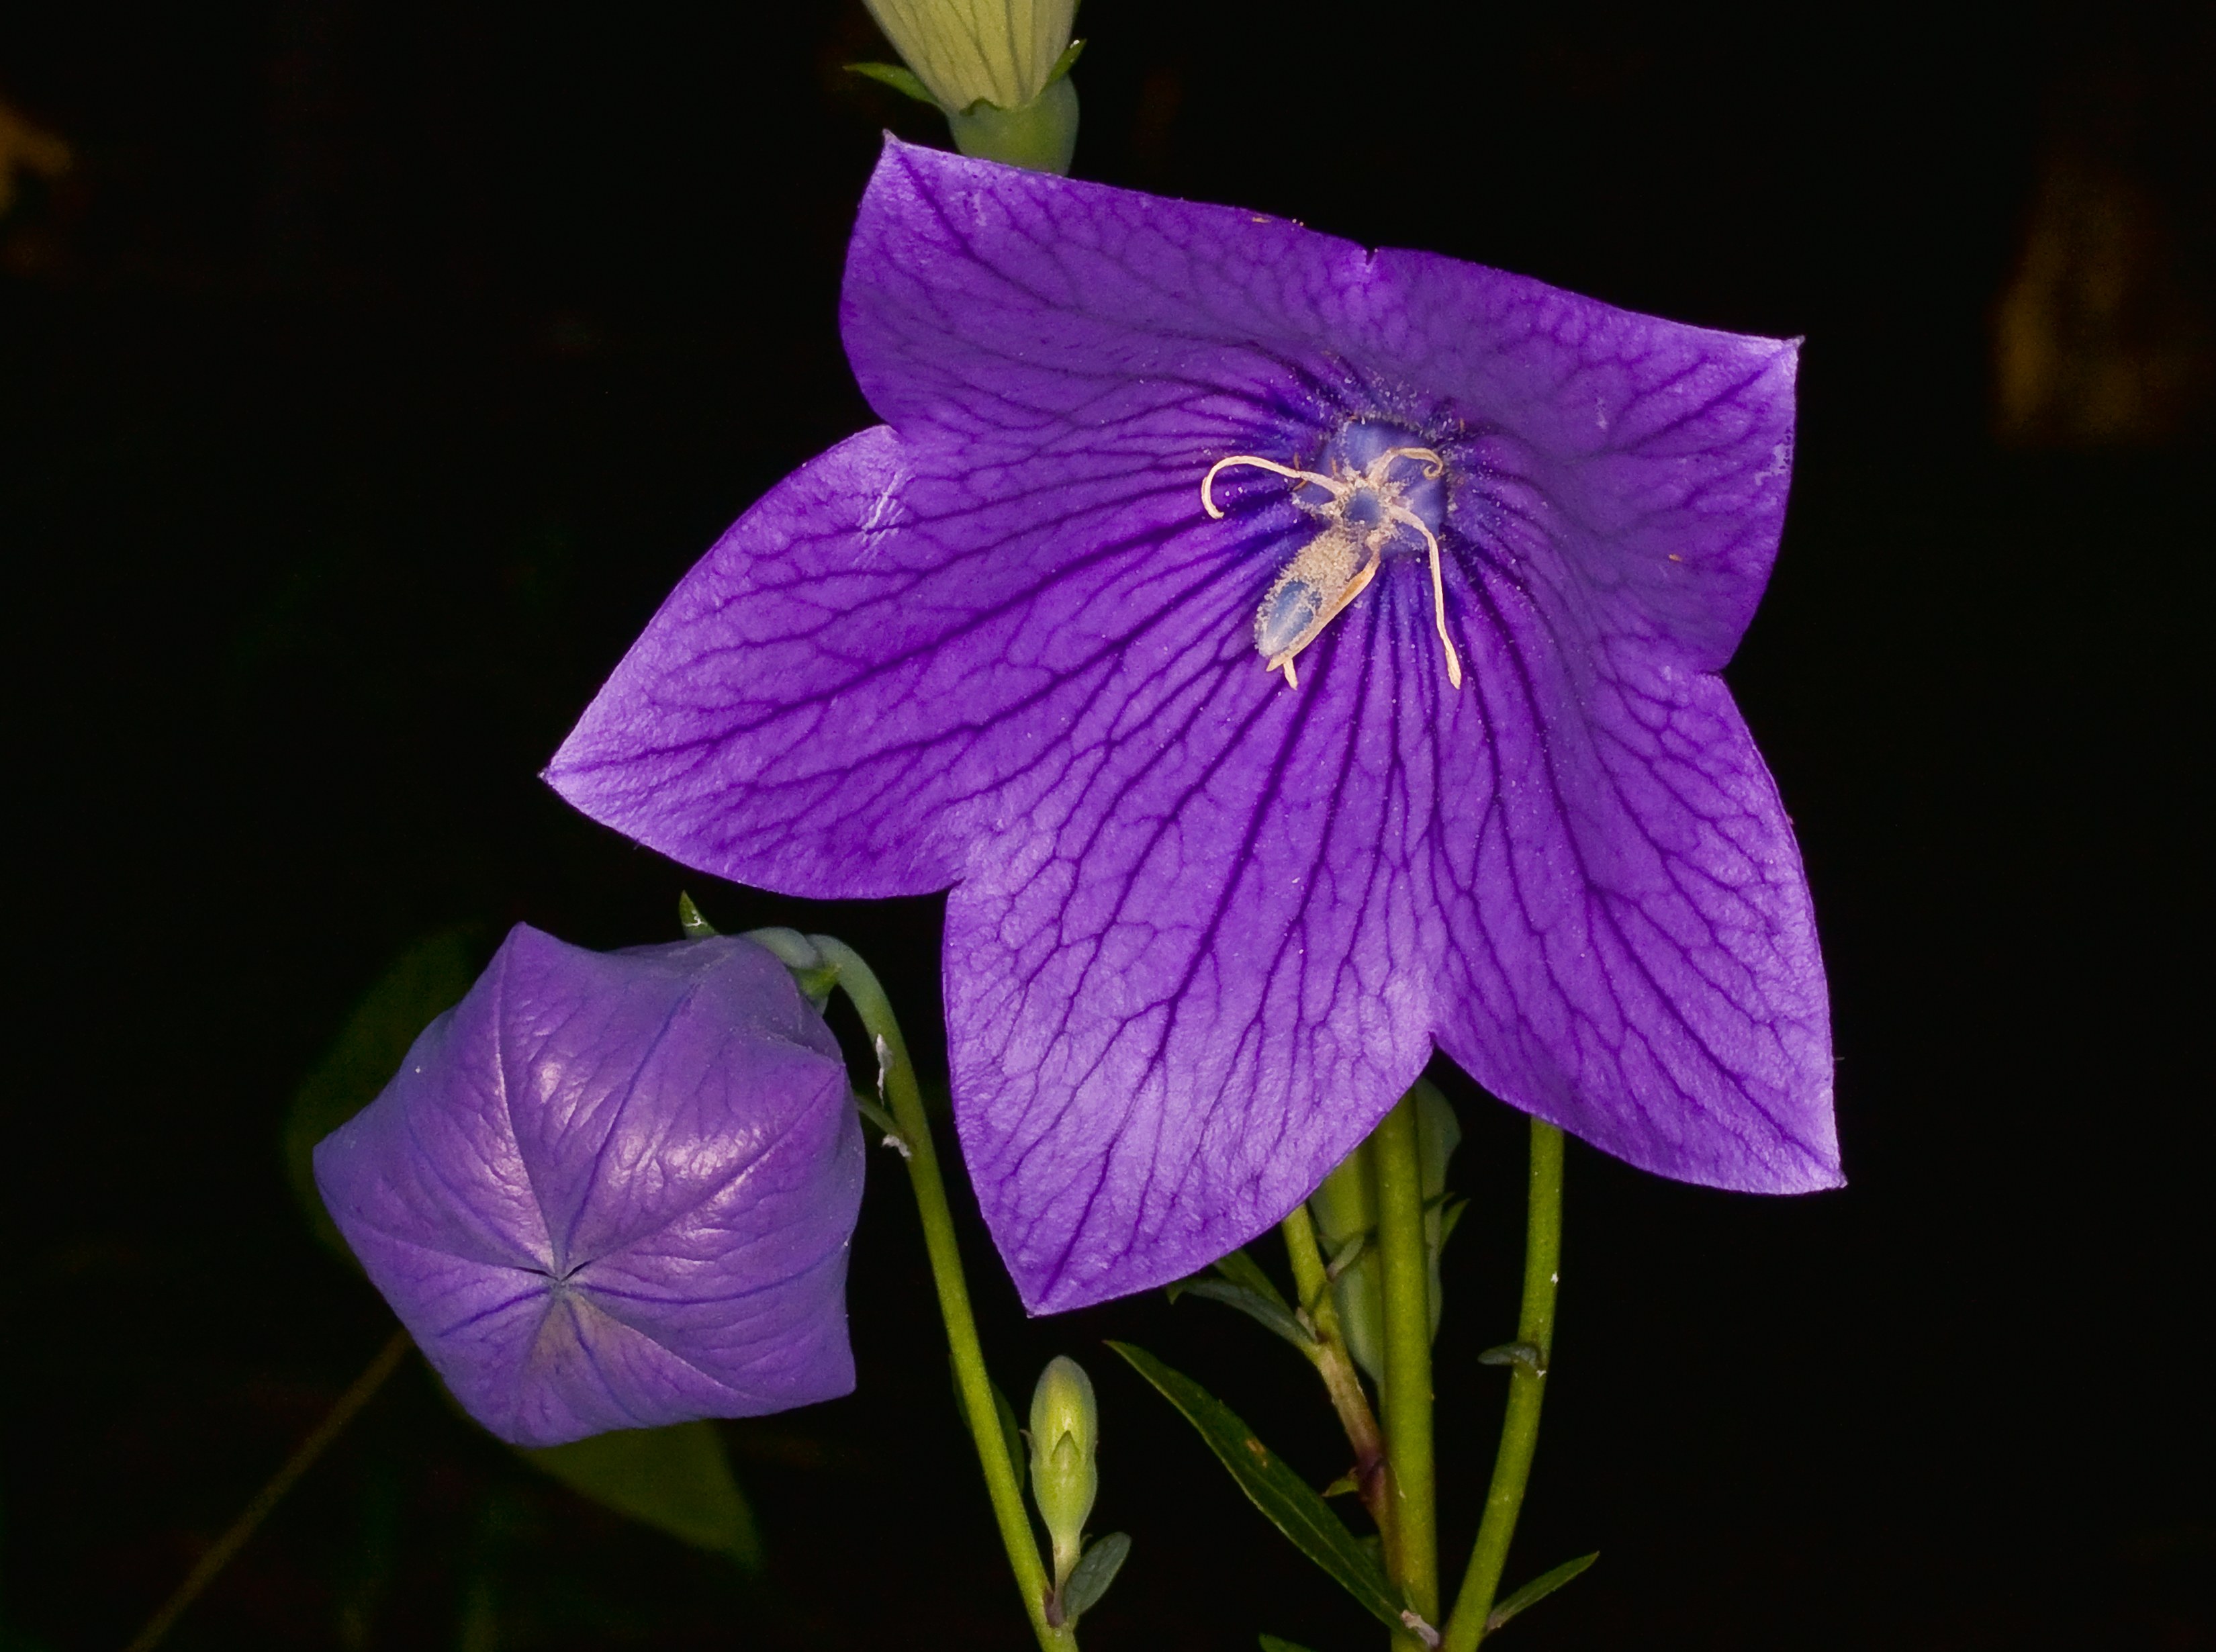 Balloon Flowers, bud and open